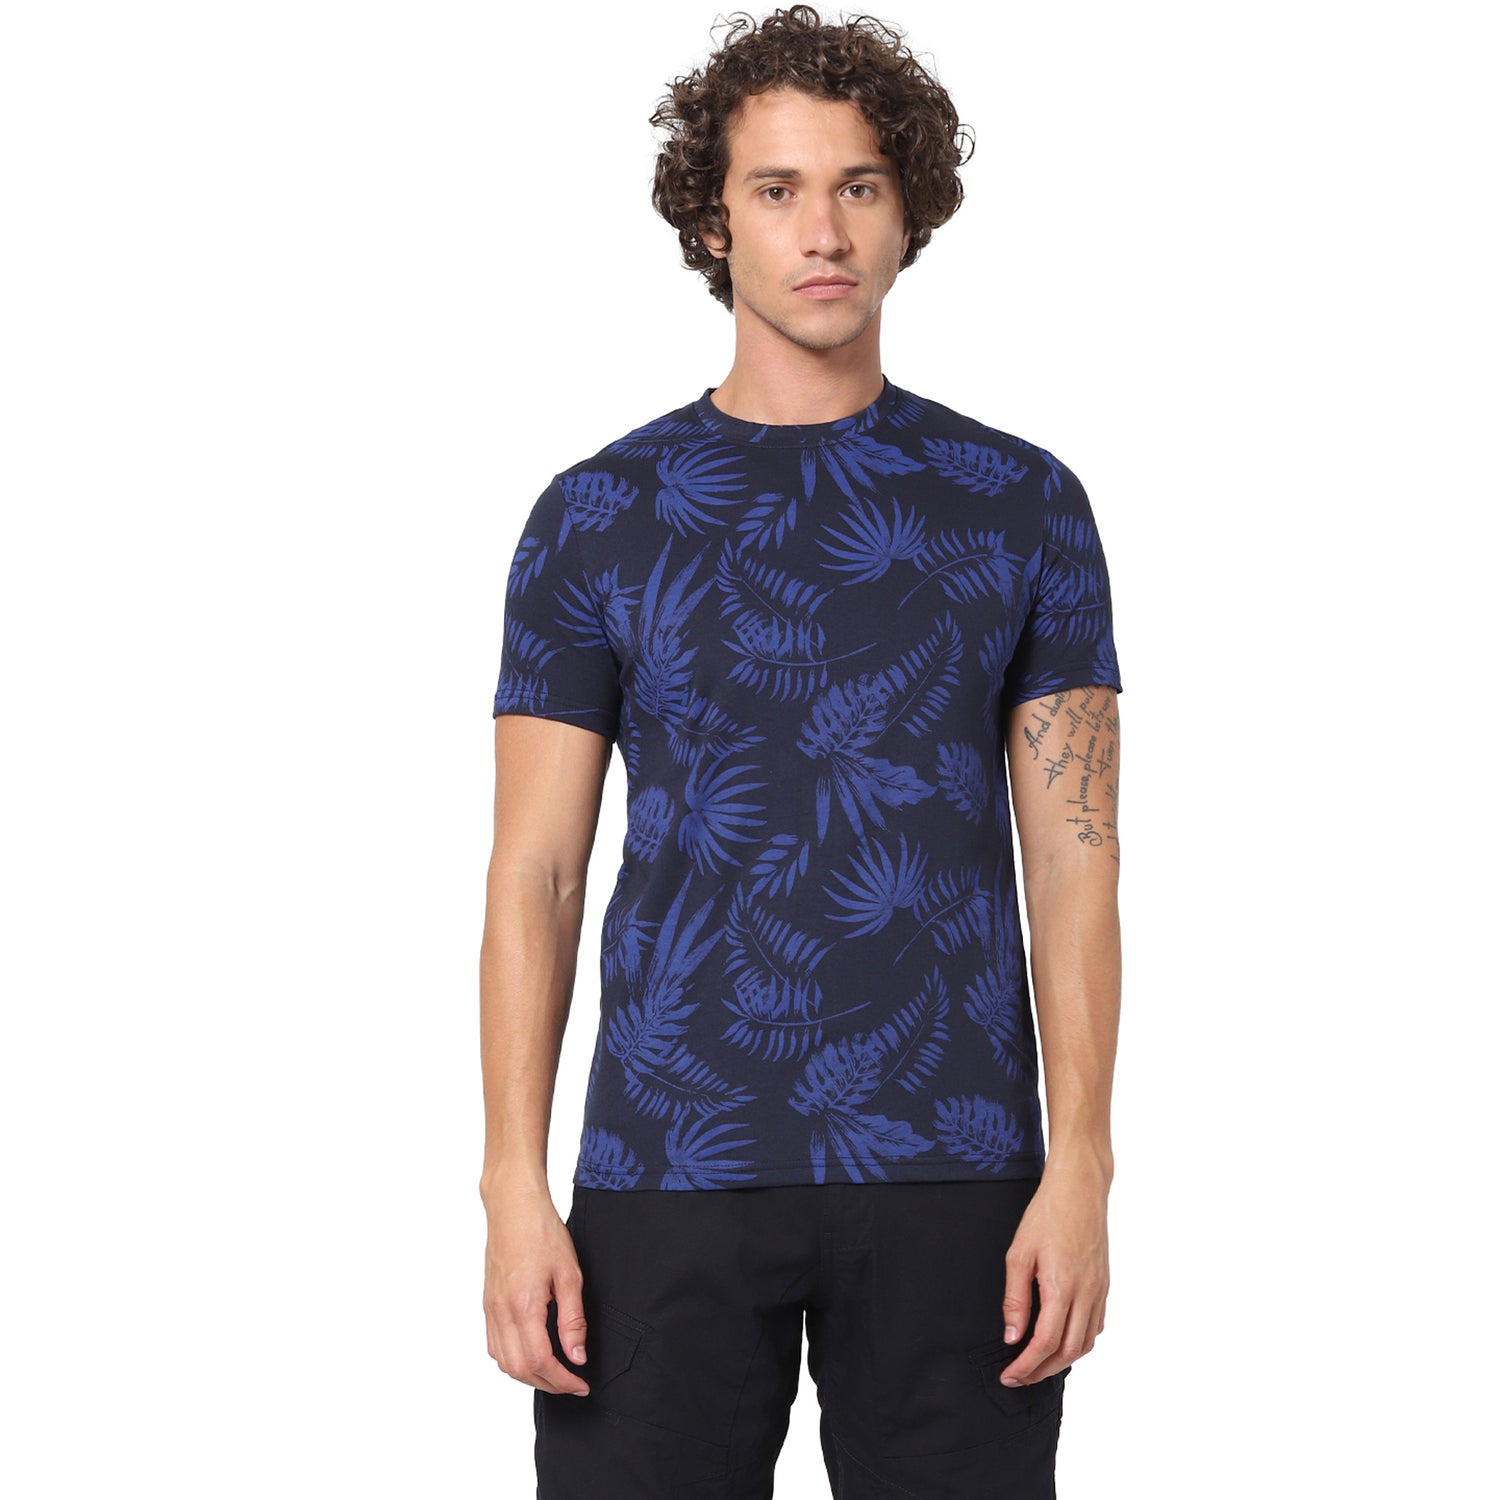 Navy Blue Floral Printed Tropical T-shirt (TECOCOTIER)